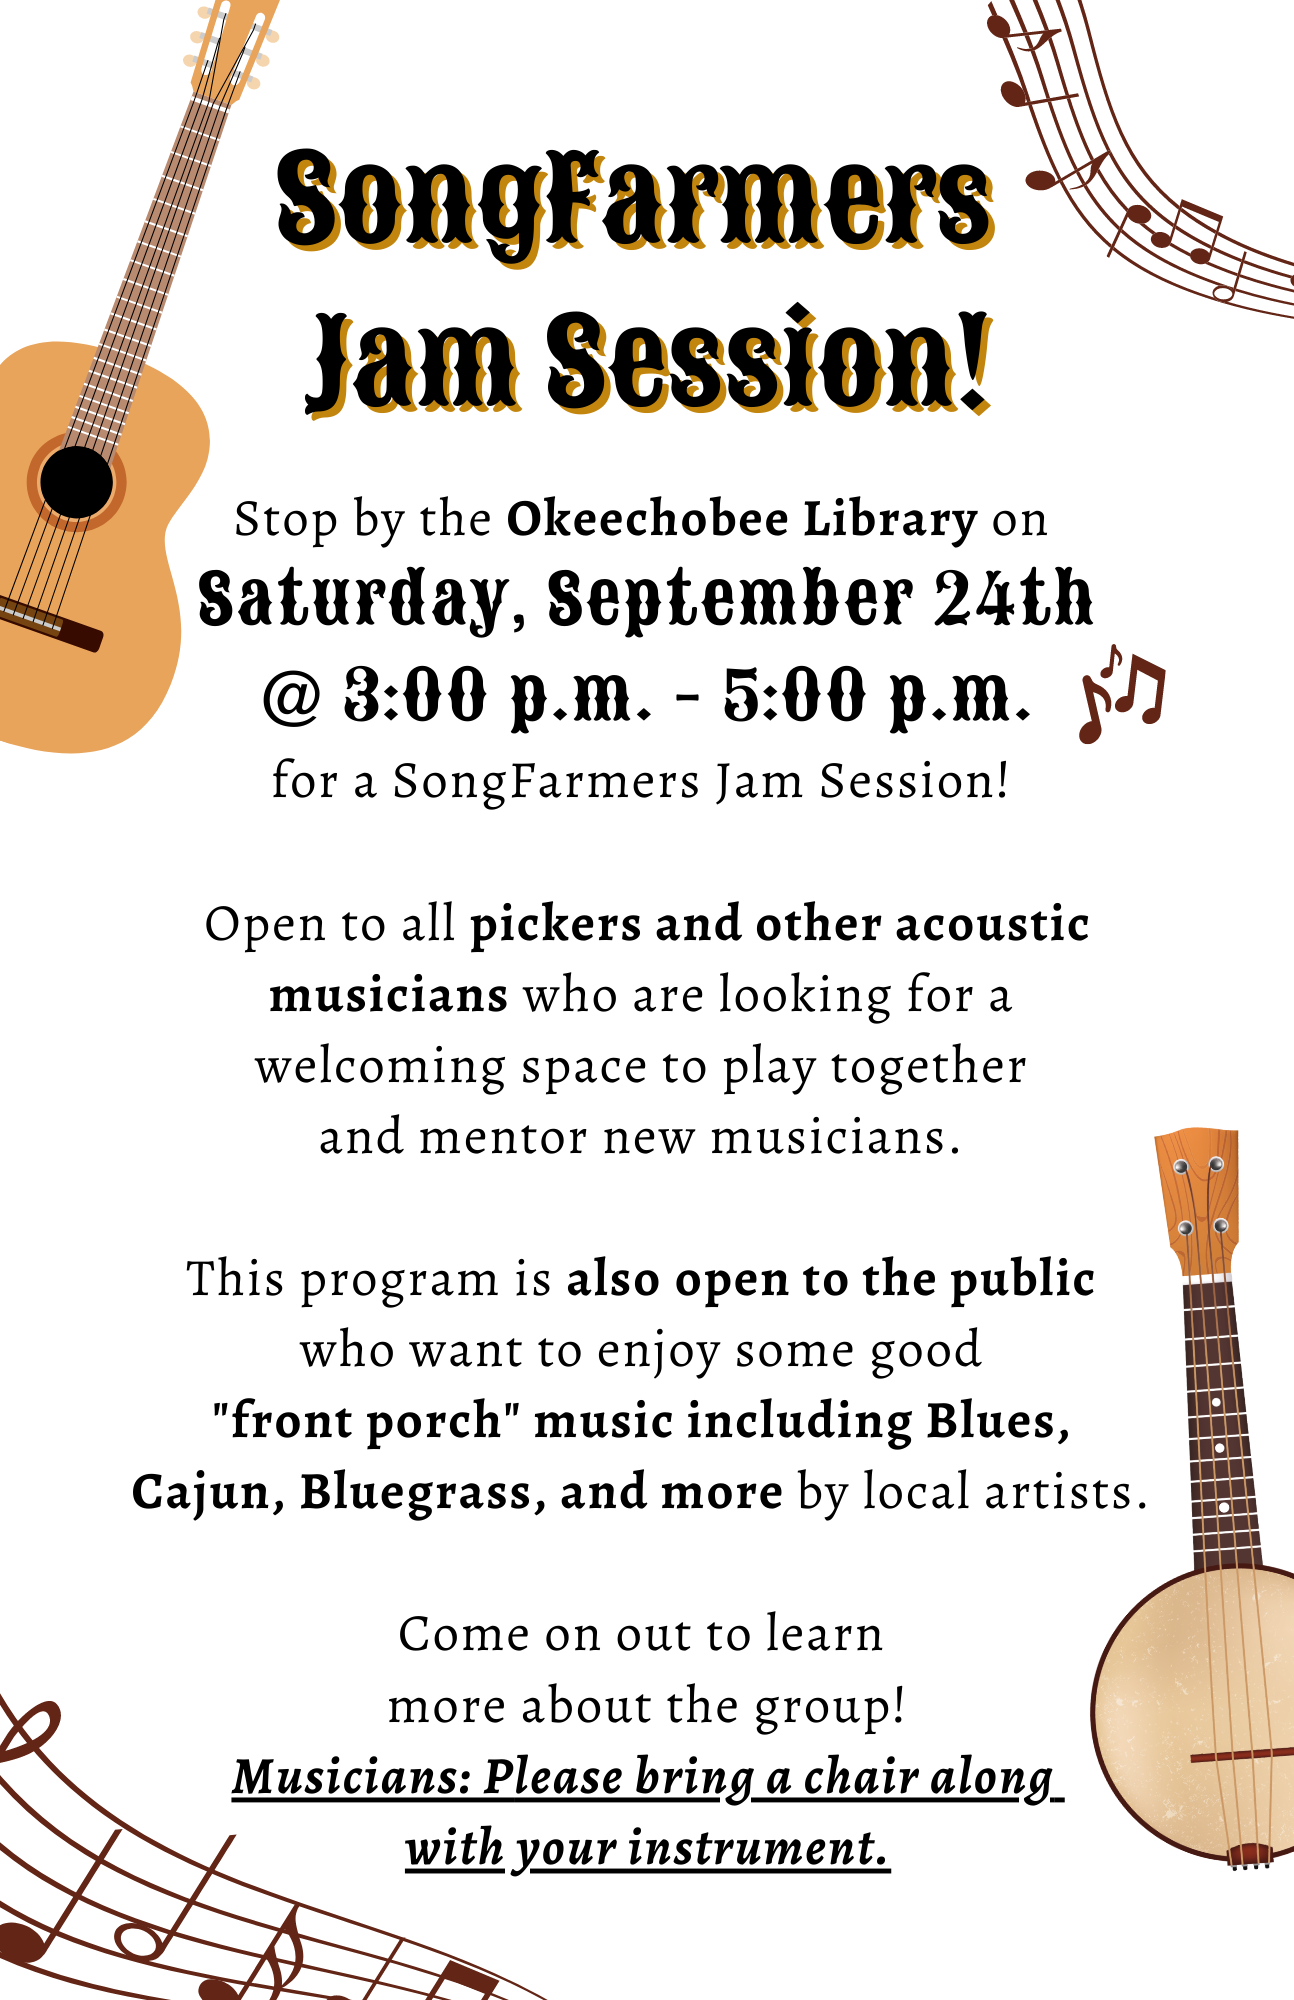 Drop on by the Okeechobee Library, Saturday September 24th, at 3pm to join in some local music! This program is open to all public who want to enjoy some good "front porch" music including Blues, Cajun, Bluegrass, and more by local artists.